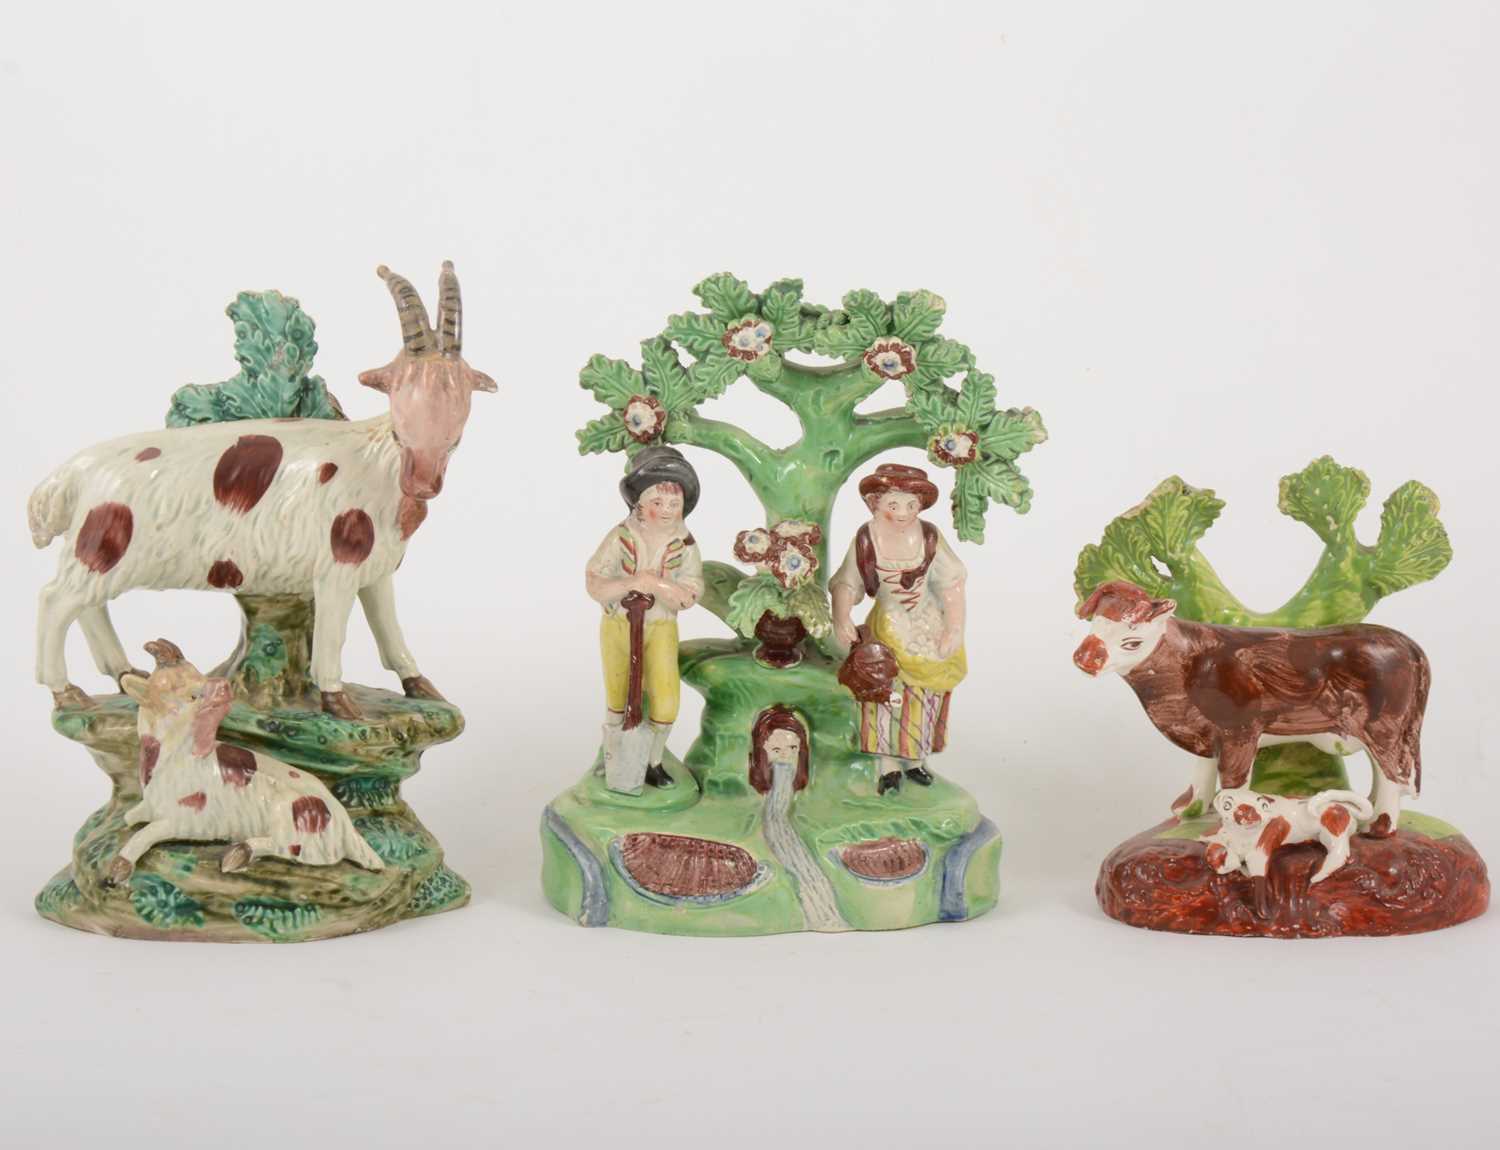 Lot 11 - A Staffordshire pearl glazed earthenware group, gardeners by a fountain, early 19th century, and two bocage groups